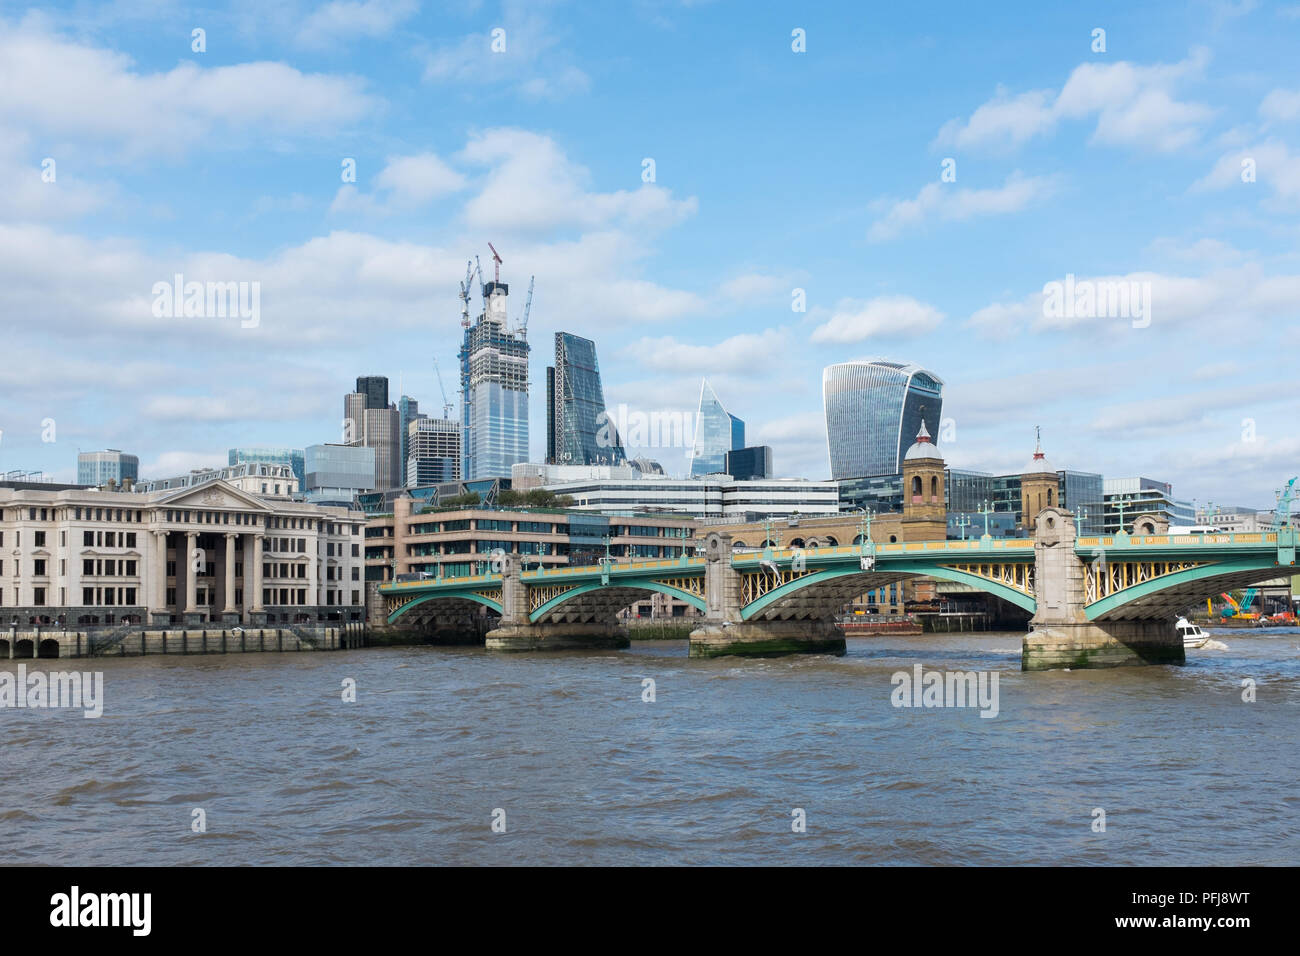 Southwark Bridge crossing the River Thames in London with the City of London Financial District in the background Stock Photo